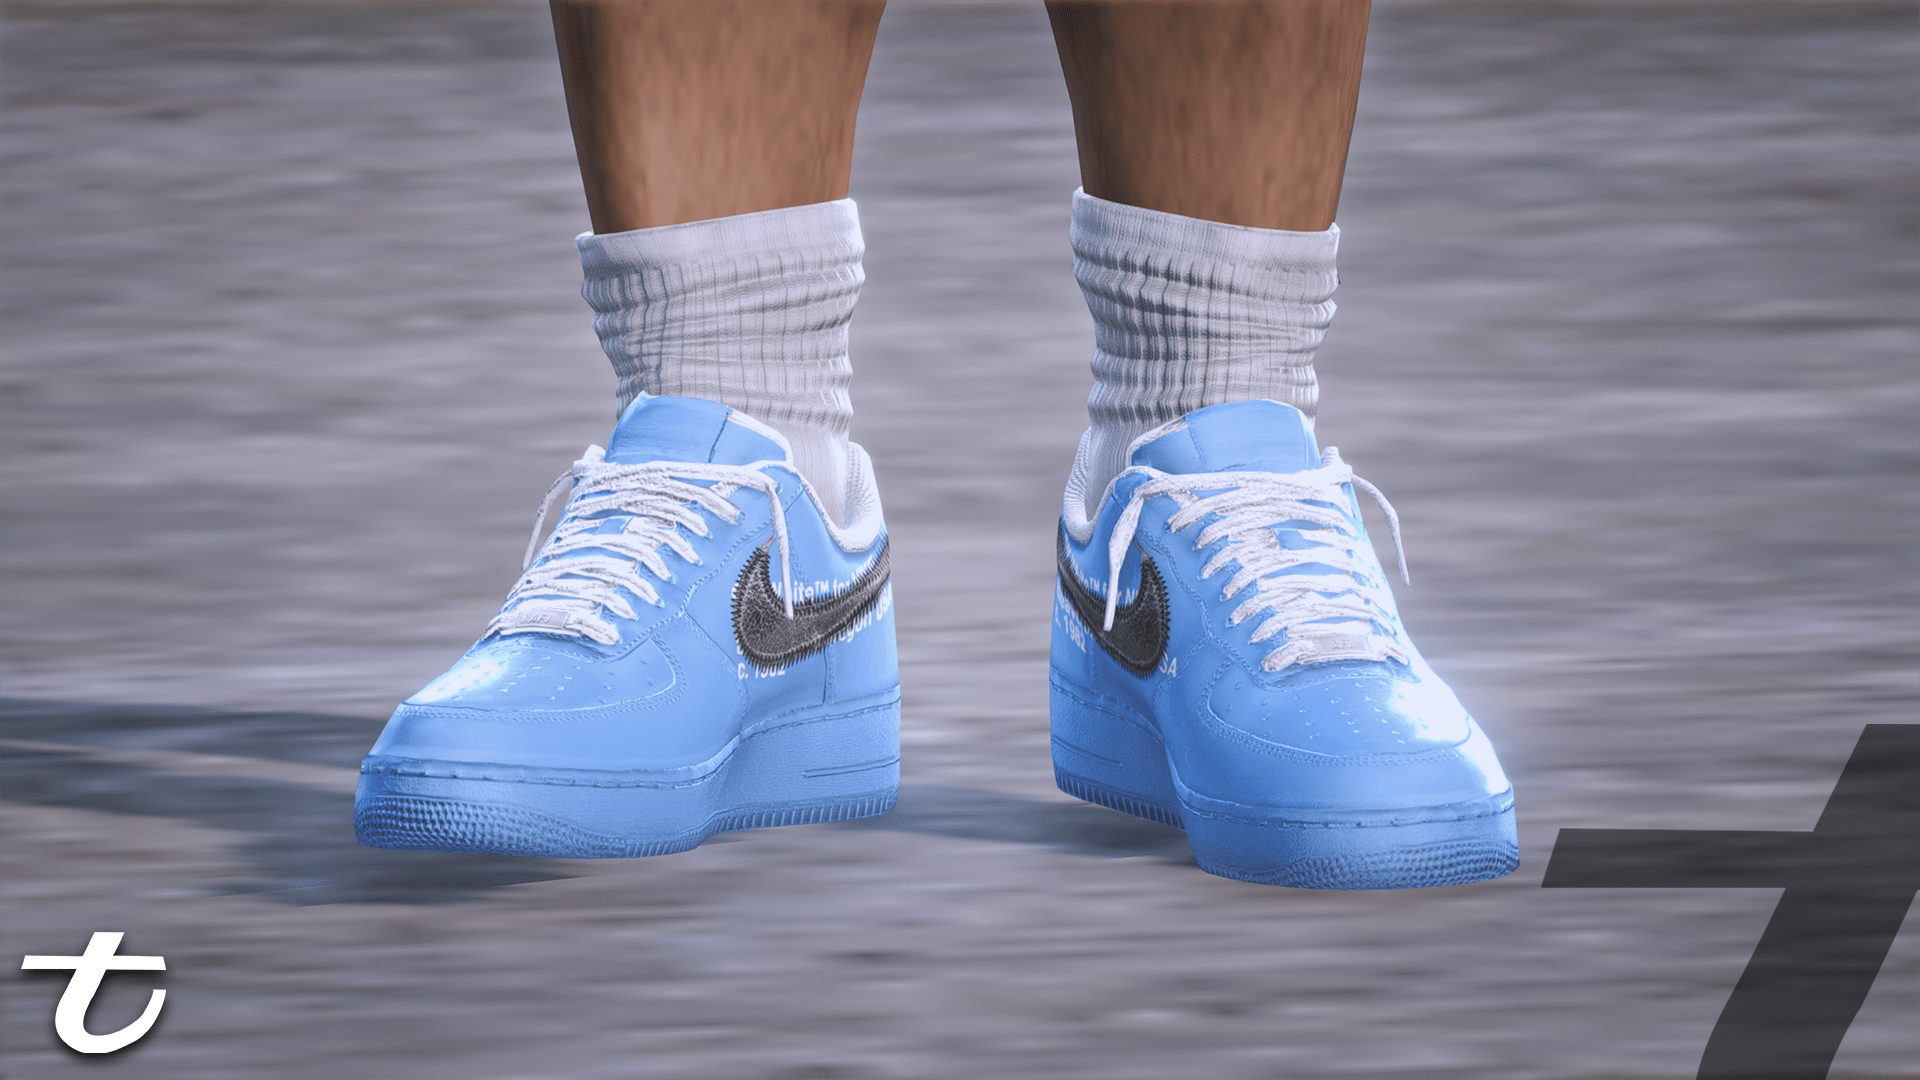 Nike Air Force 1 Low Off-White MCA Shoes